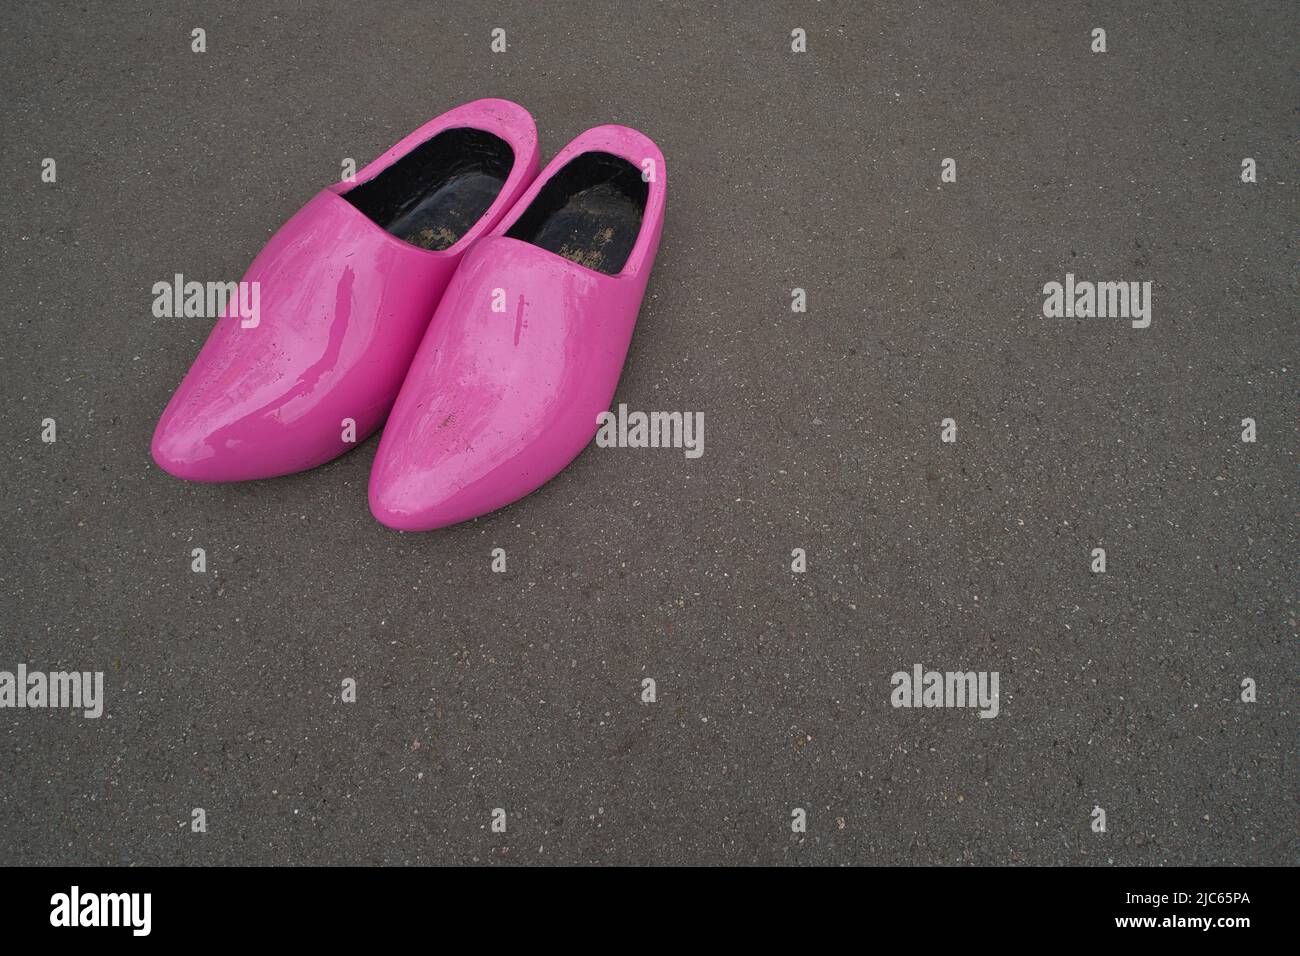 A pair of pink lacquered wooden shoes or clogs on the gray asphalt Stock Photo